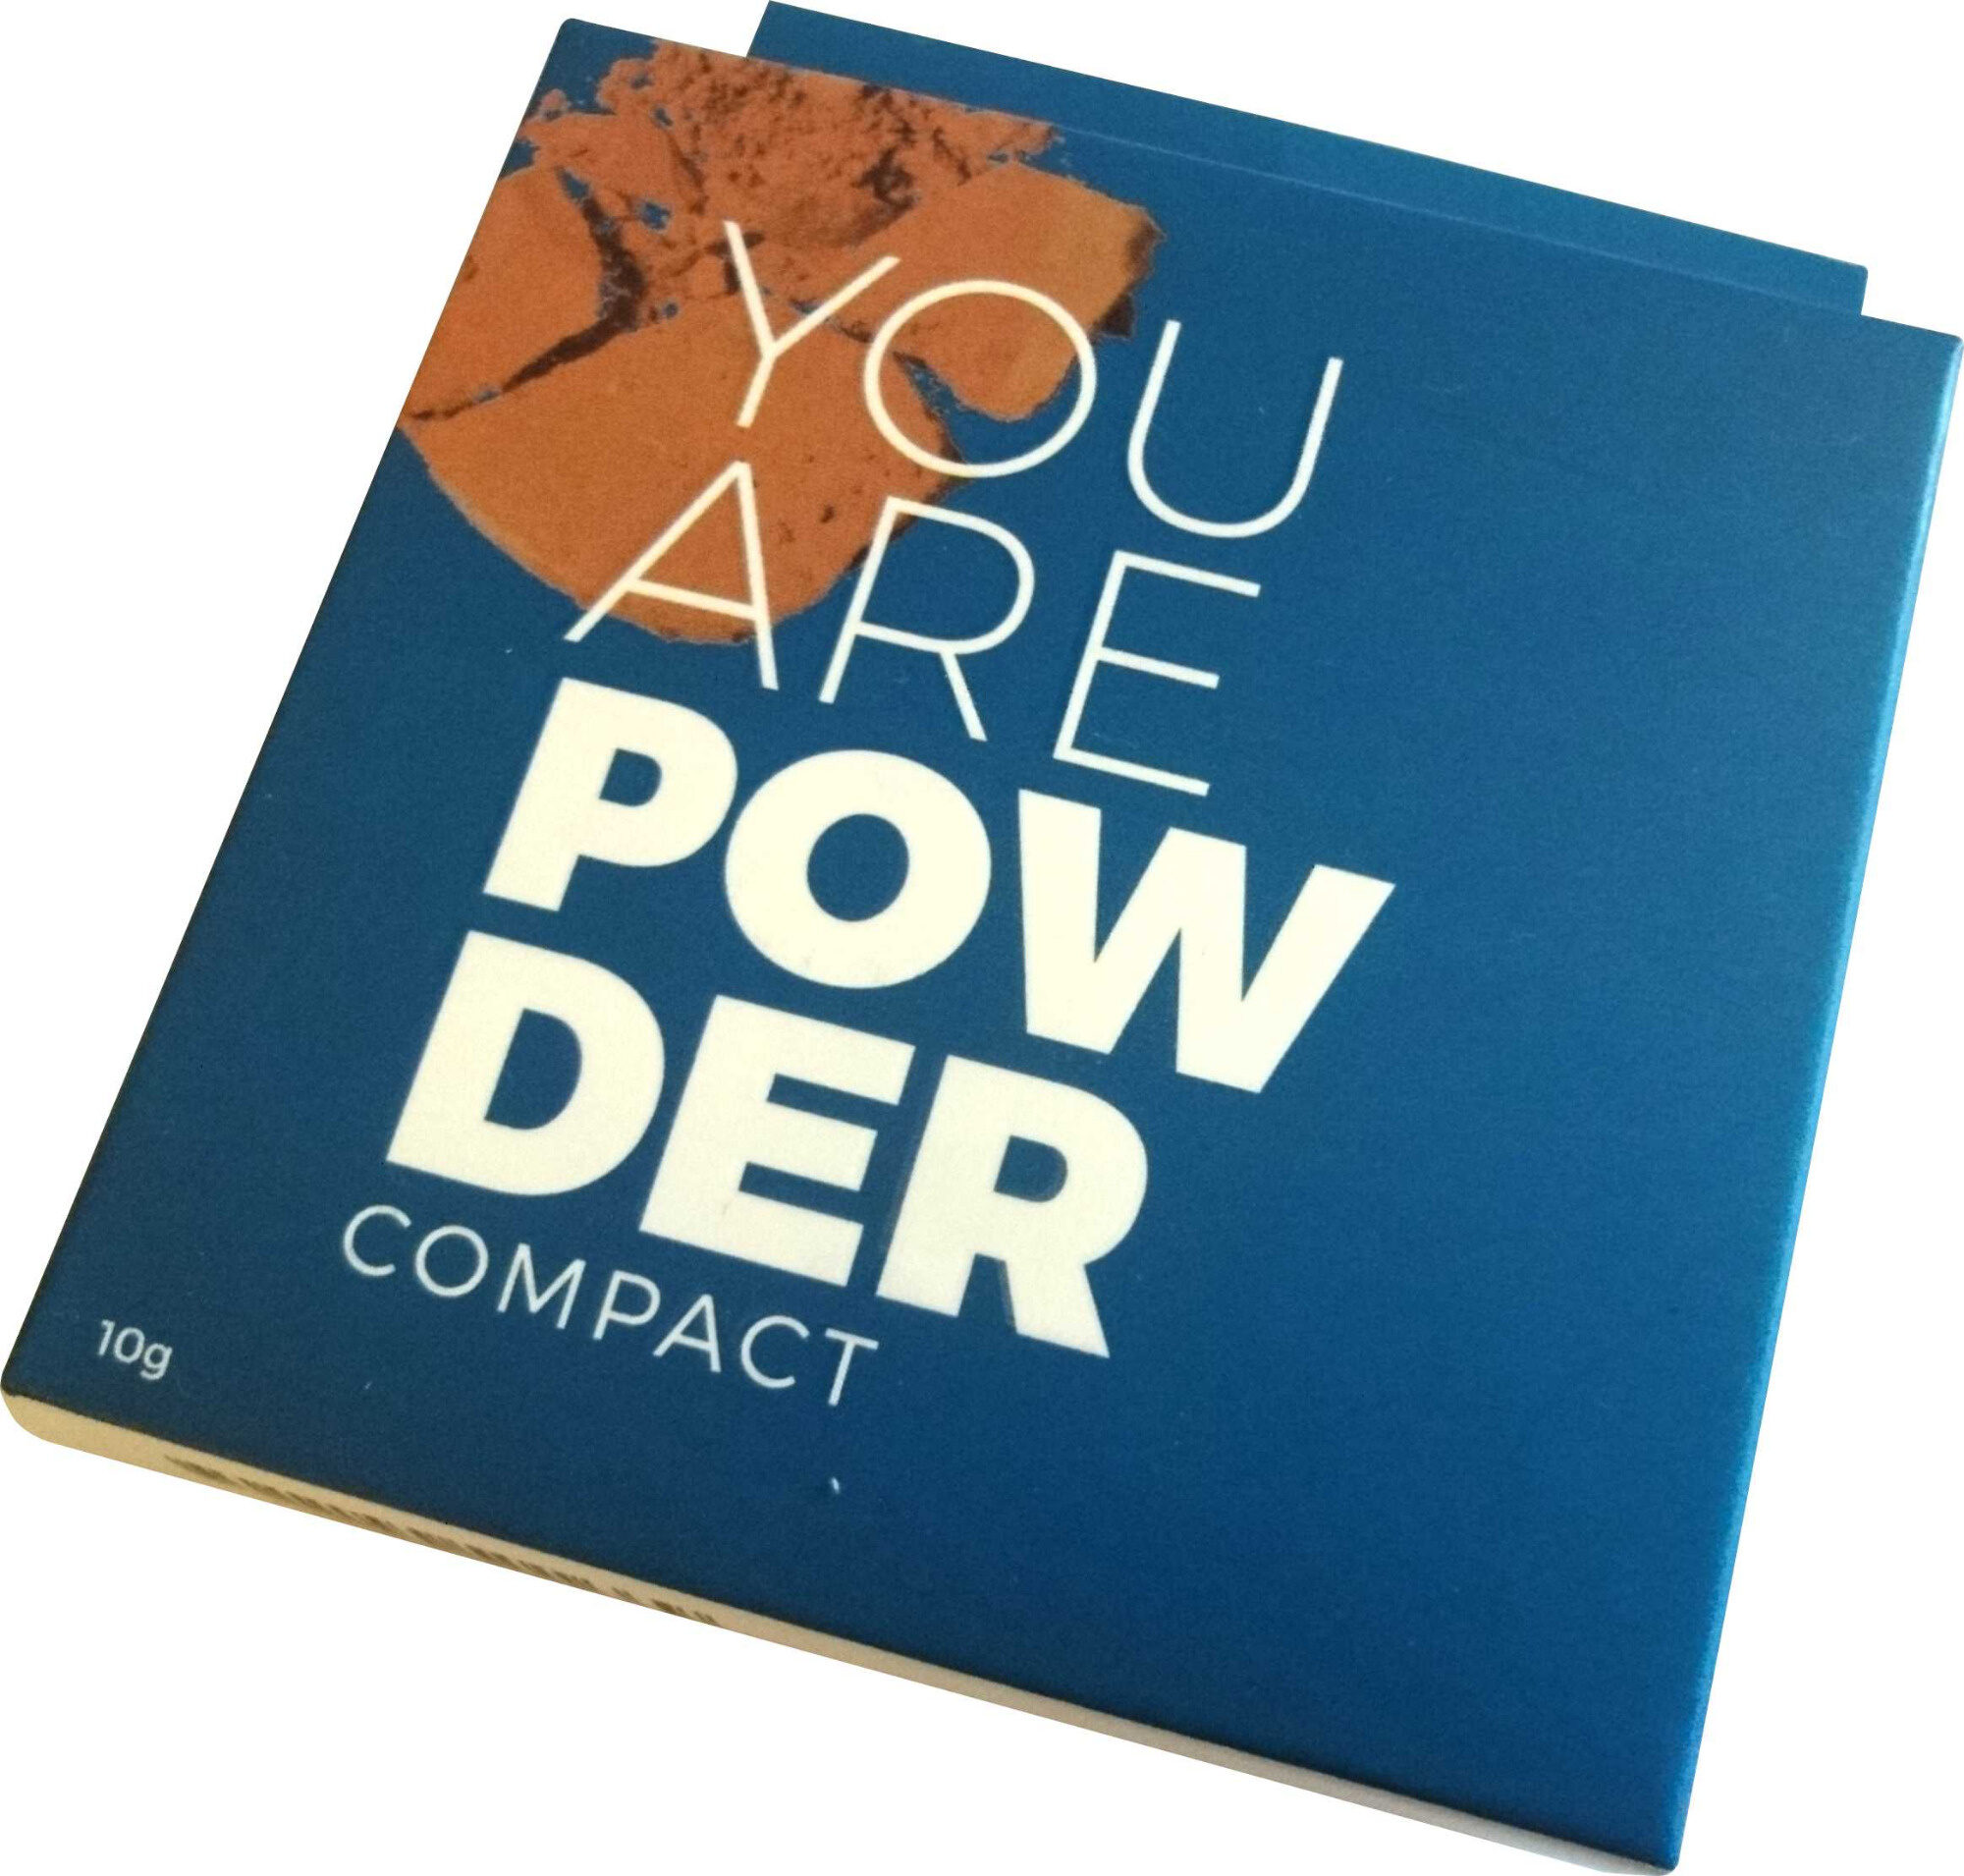 You are powder - Product - fr